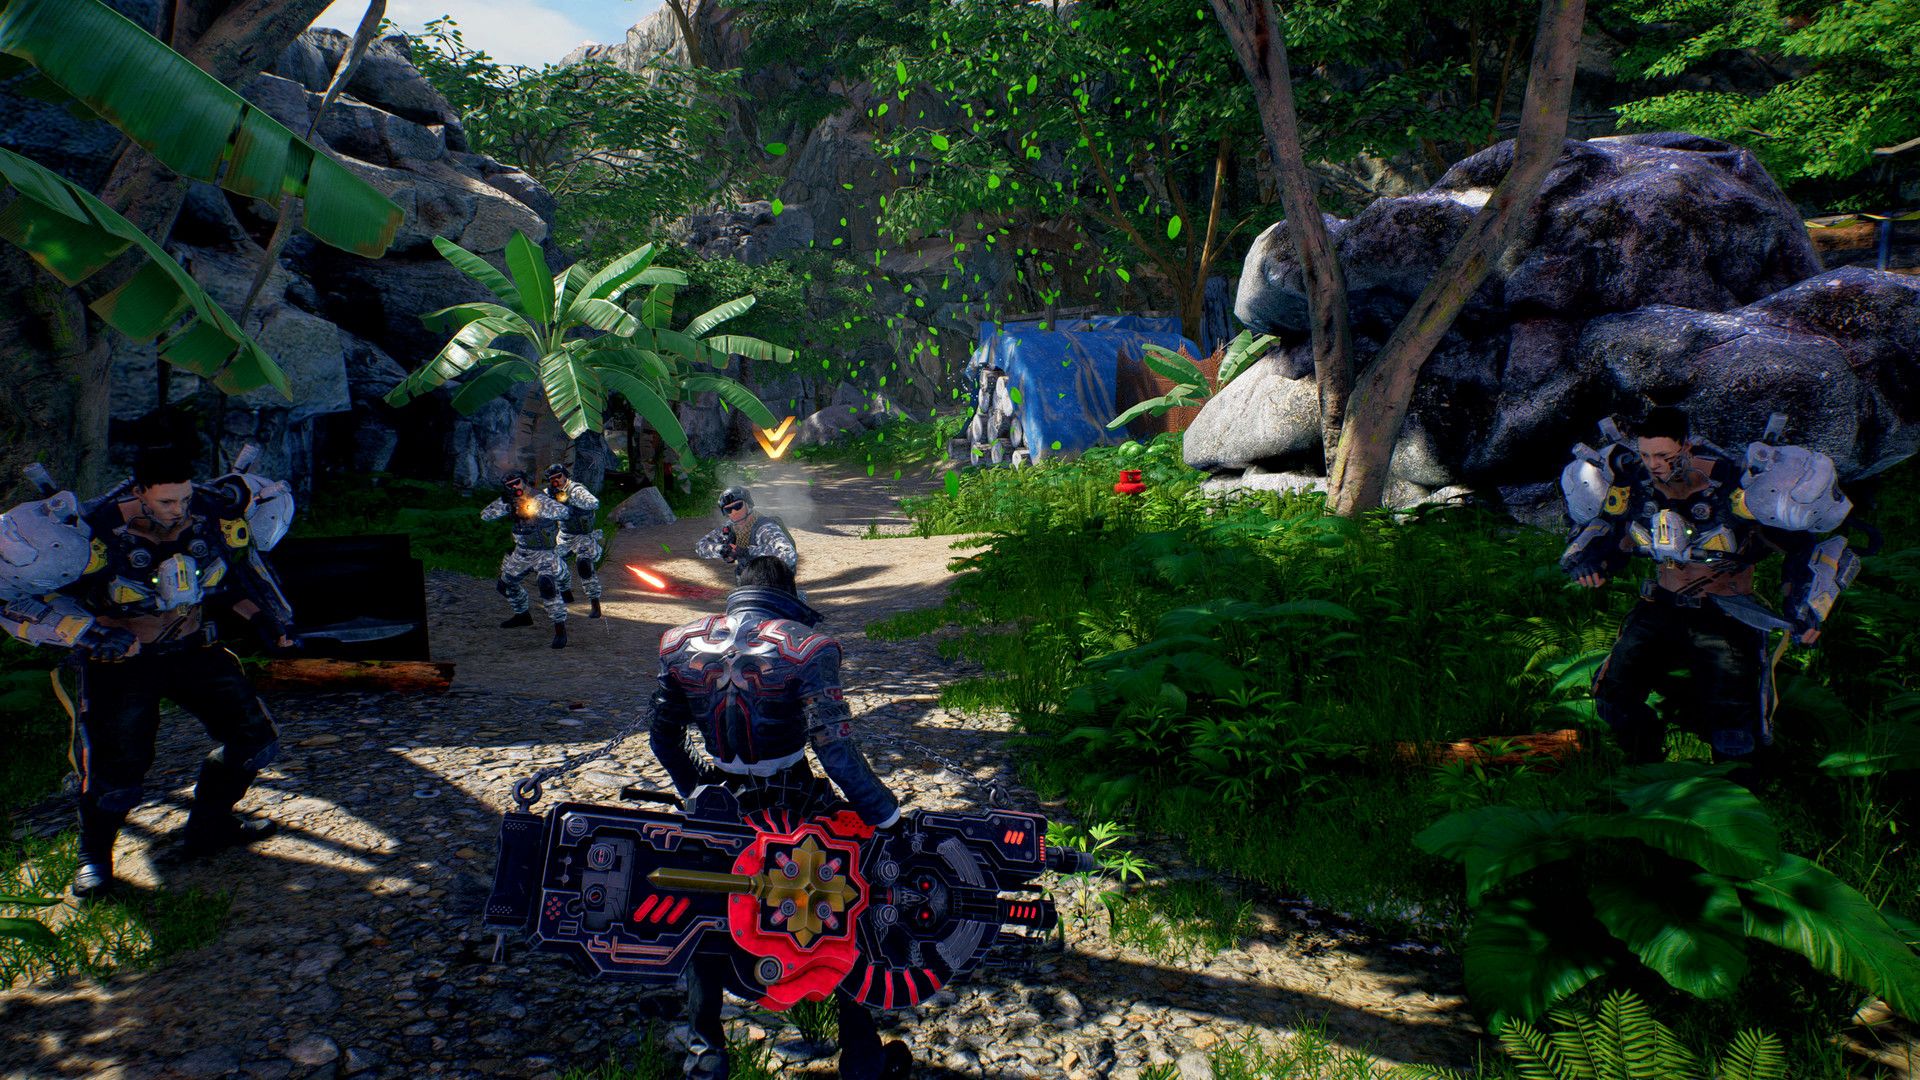 The player Character Grave, surrounded by enemies in a Jungle